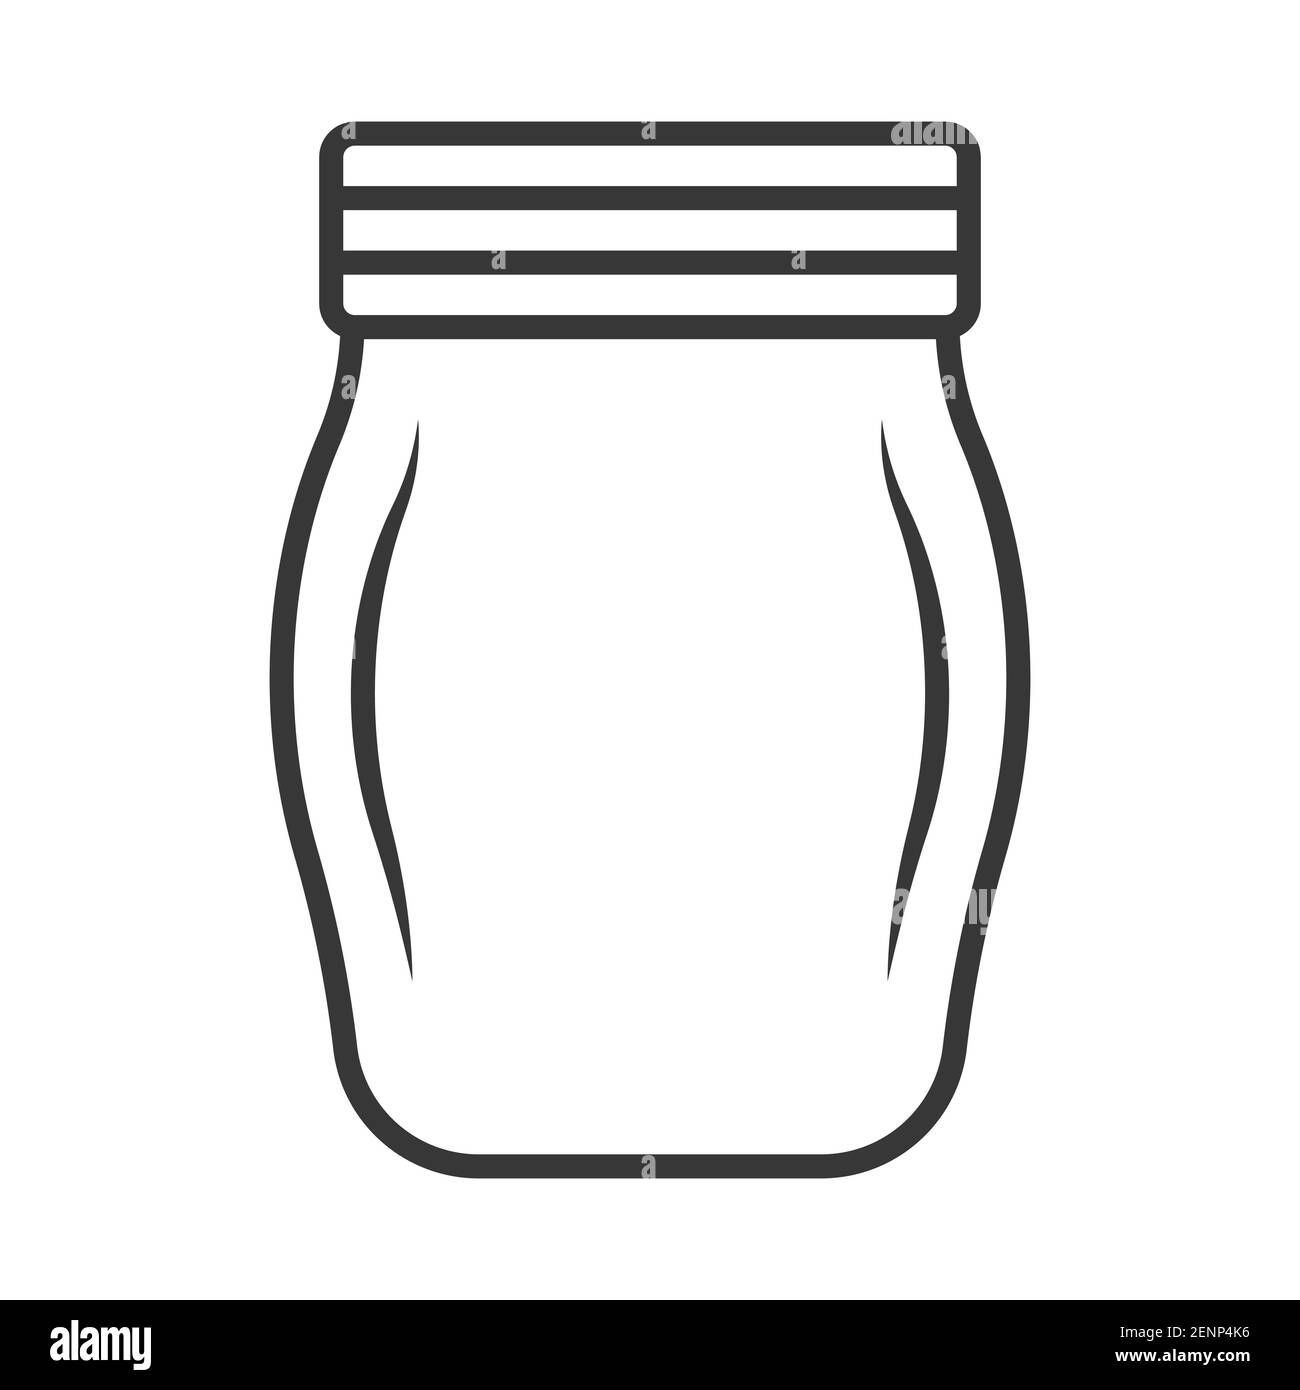 Mason bottle or Mason glass jar line art icon for apps and websites Stock Vector